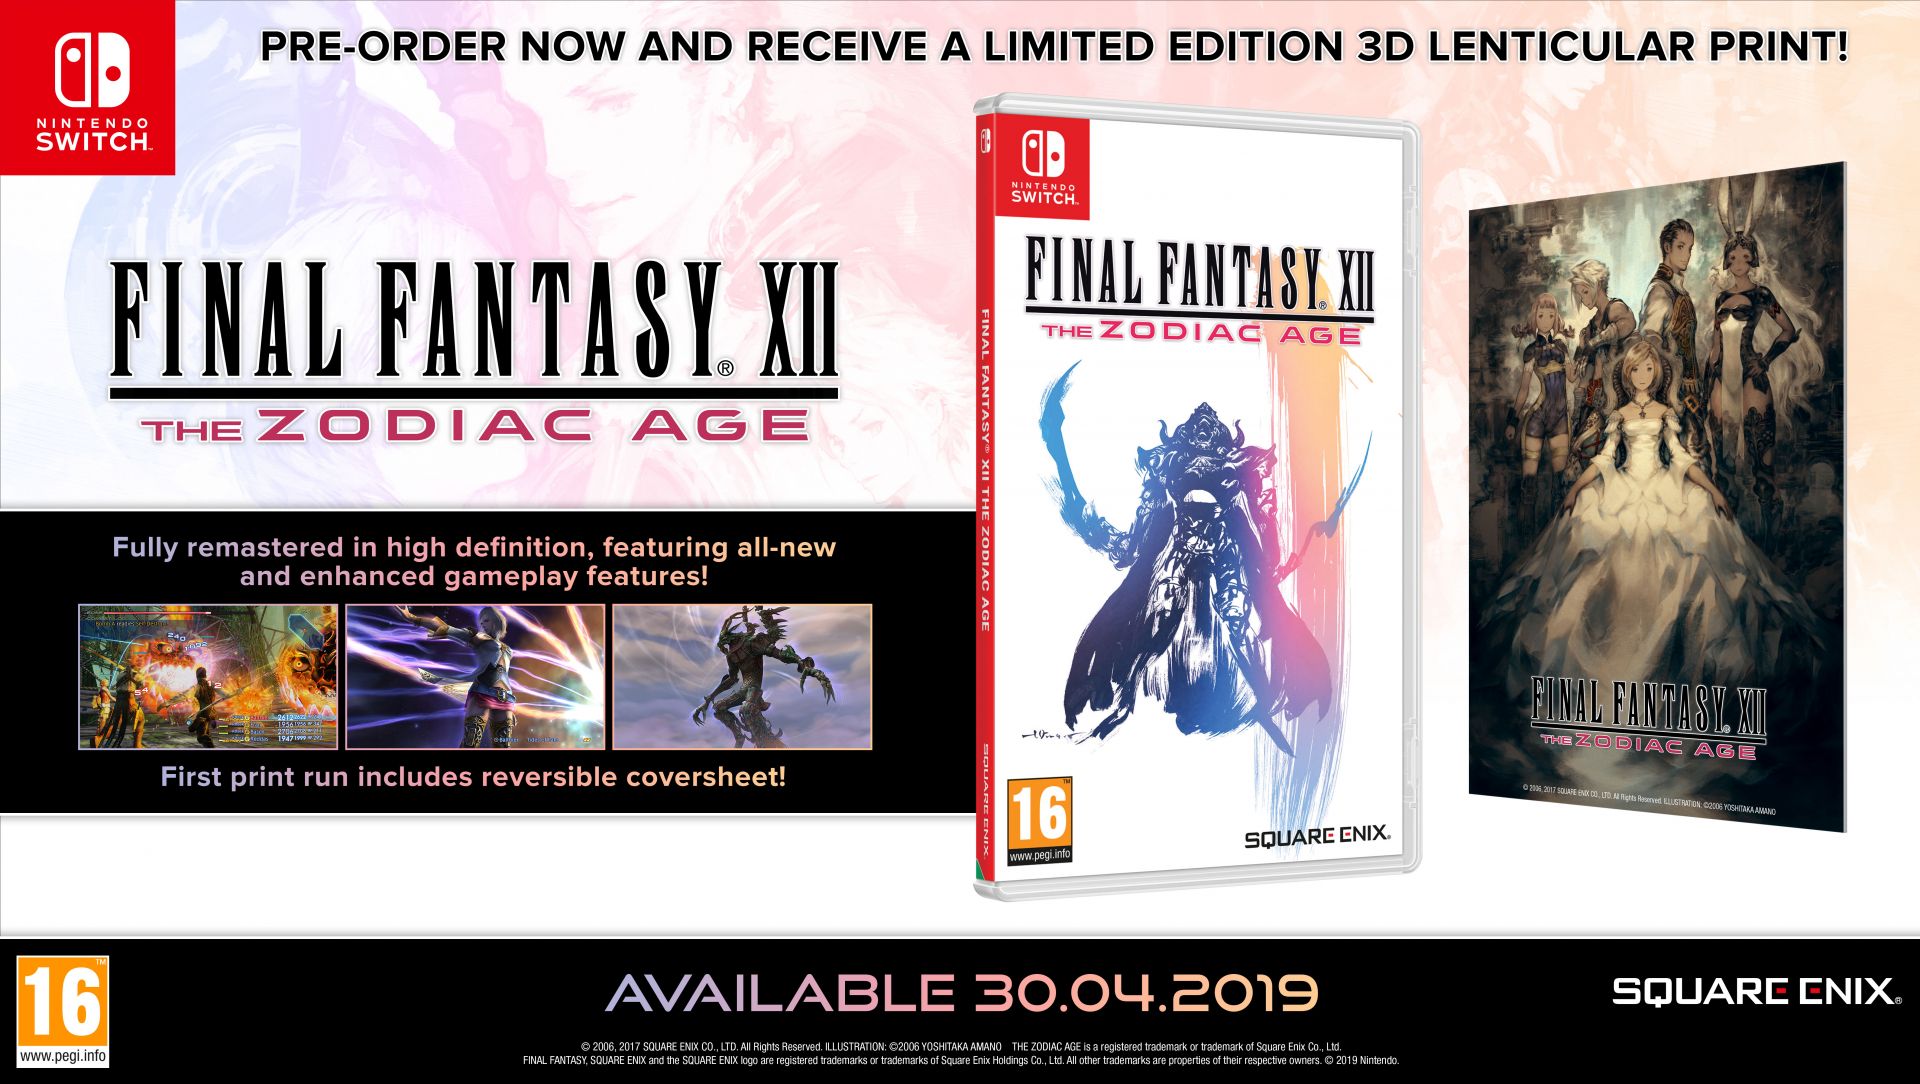 is final fantasy on switch